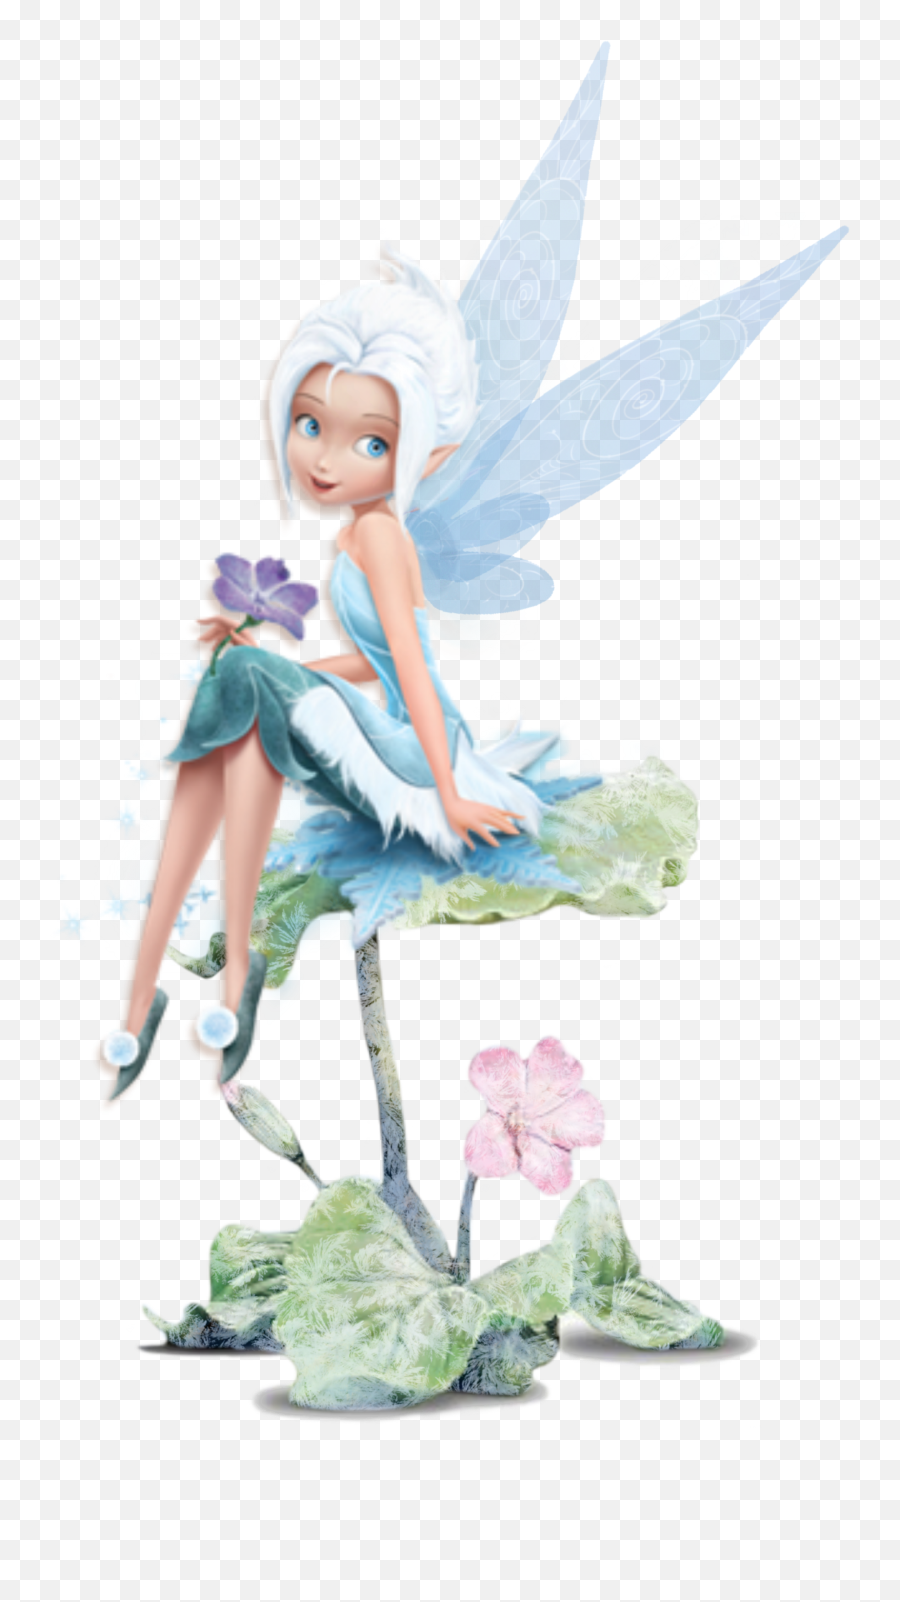 The Most Edited Tingeling Picsart - Periwinkle From Tinkerbell Emoji,Emojis For Android +tinkerbell